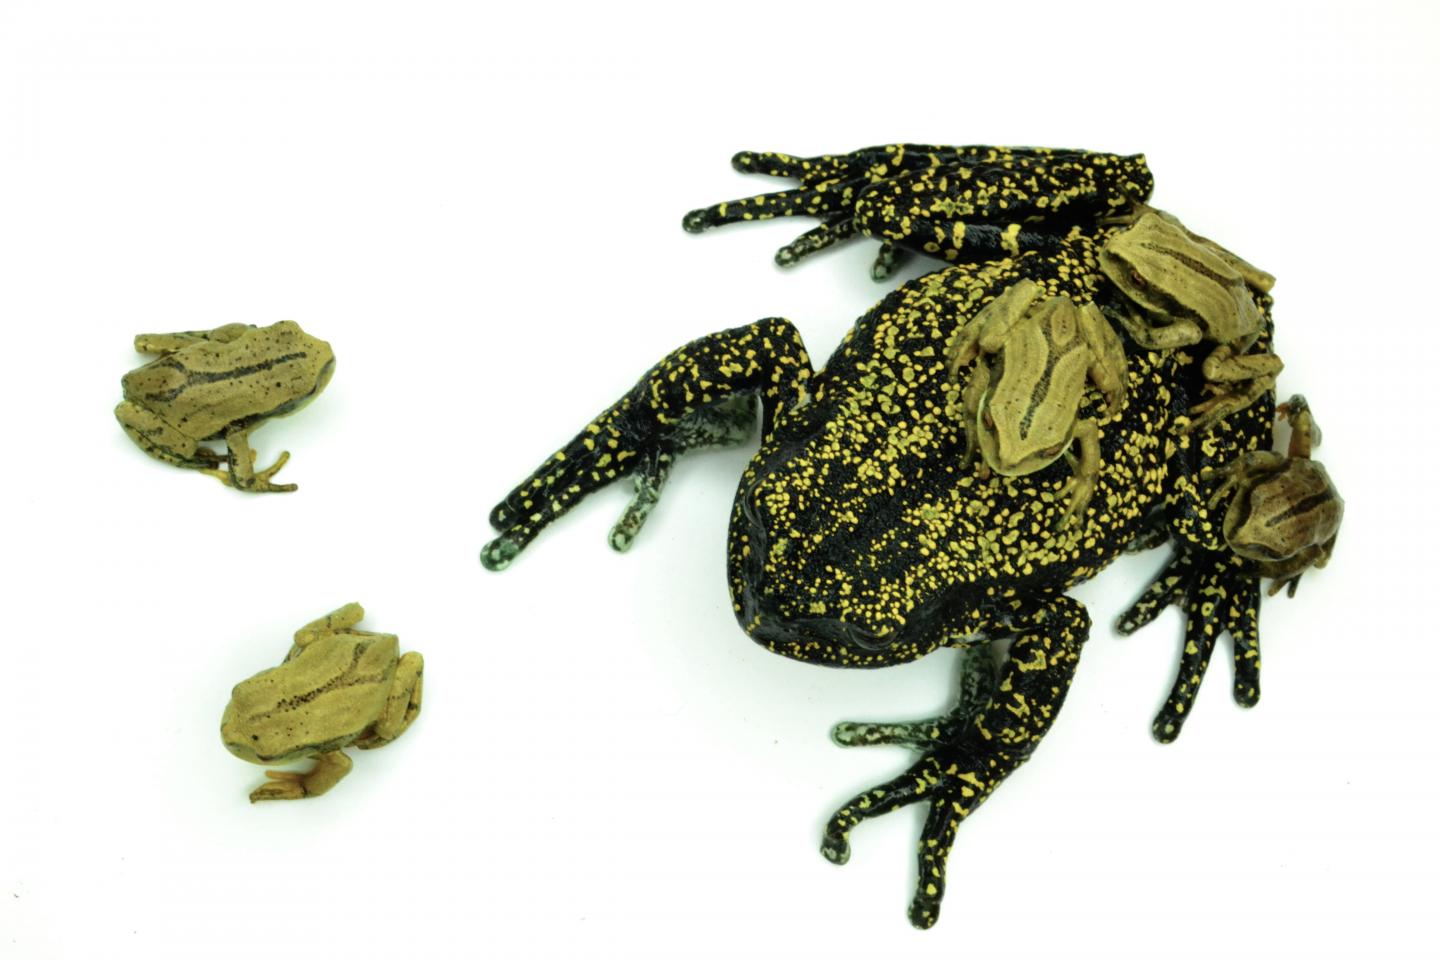 Earth’s most invasive species is a frog-killing fungus